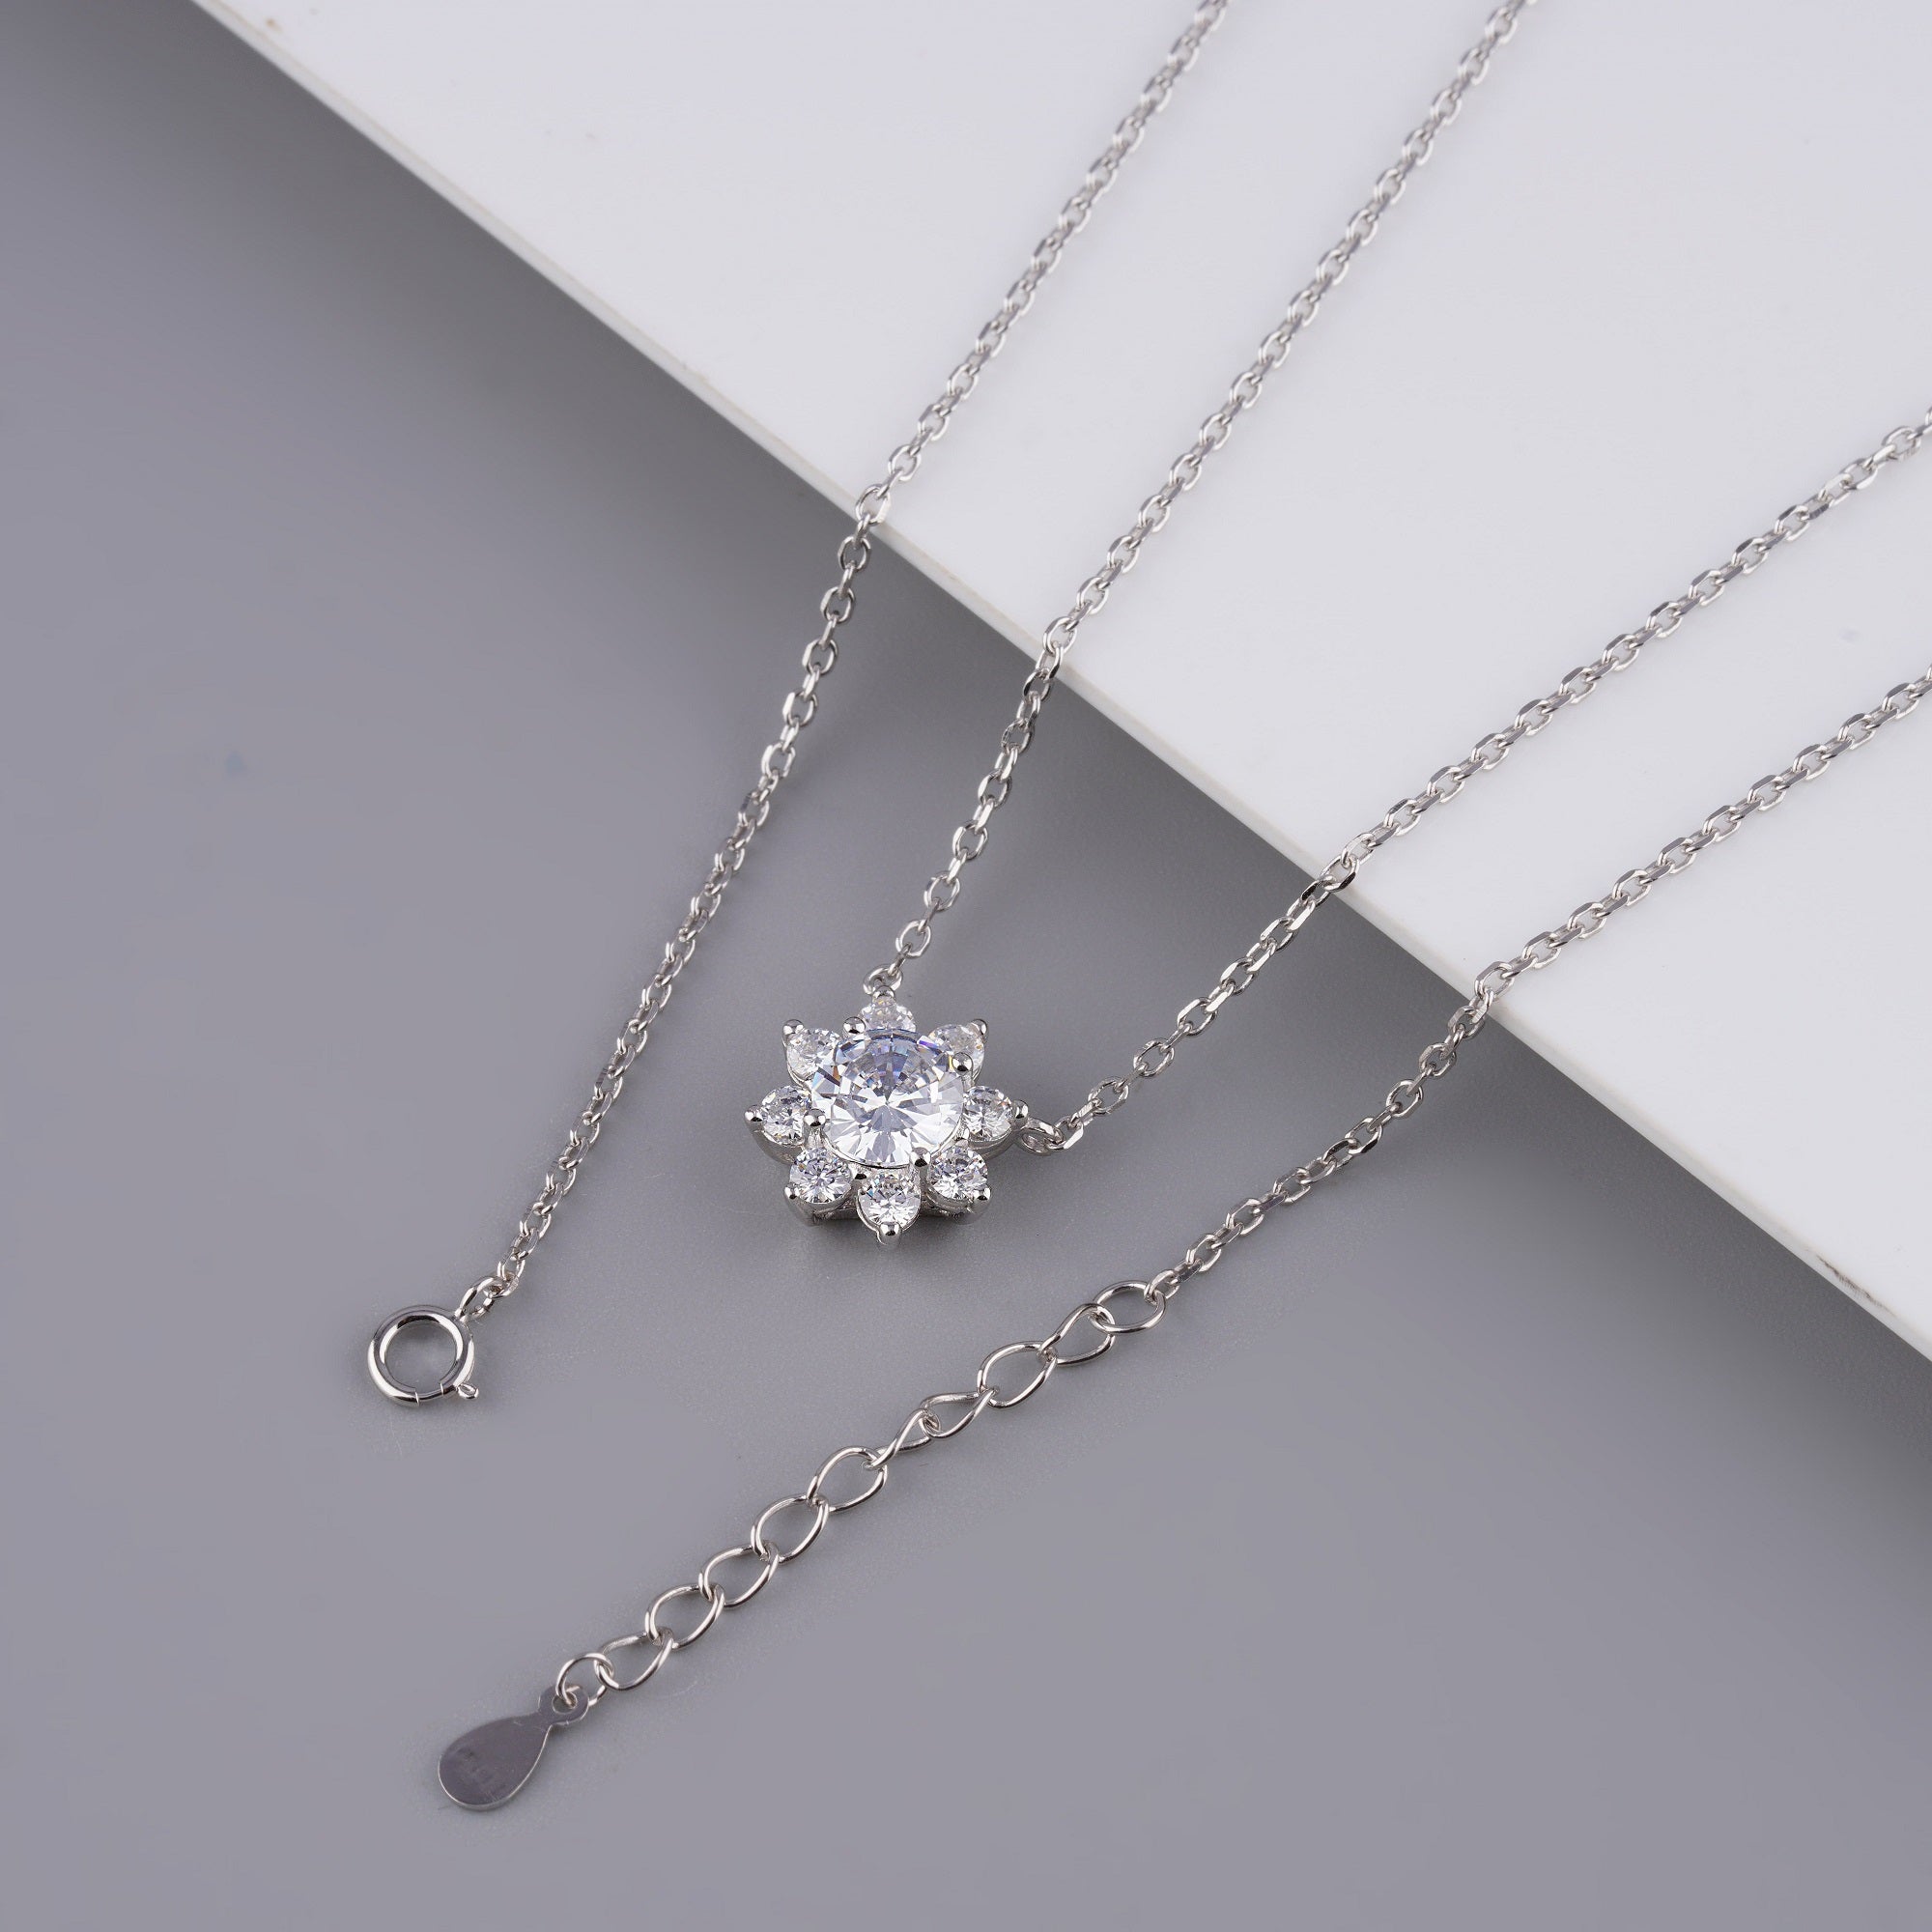 Halo Set Solitaire Silver Pendant With Adjustable Chain For Women